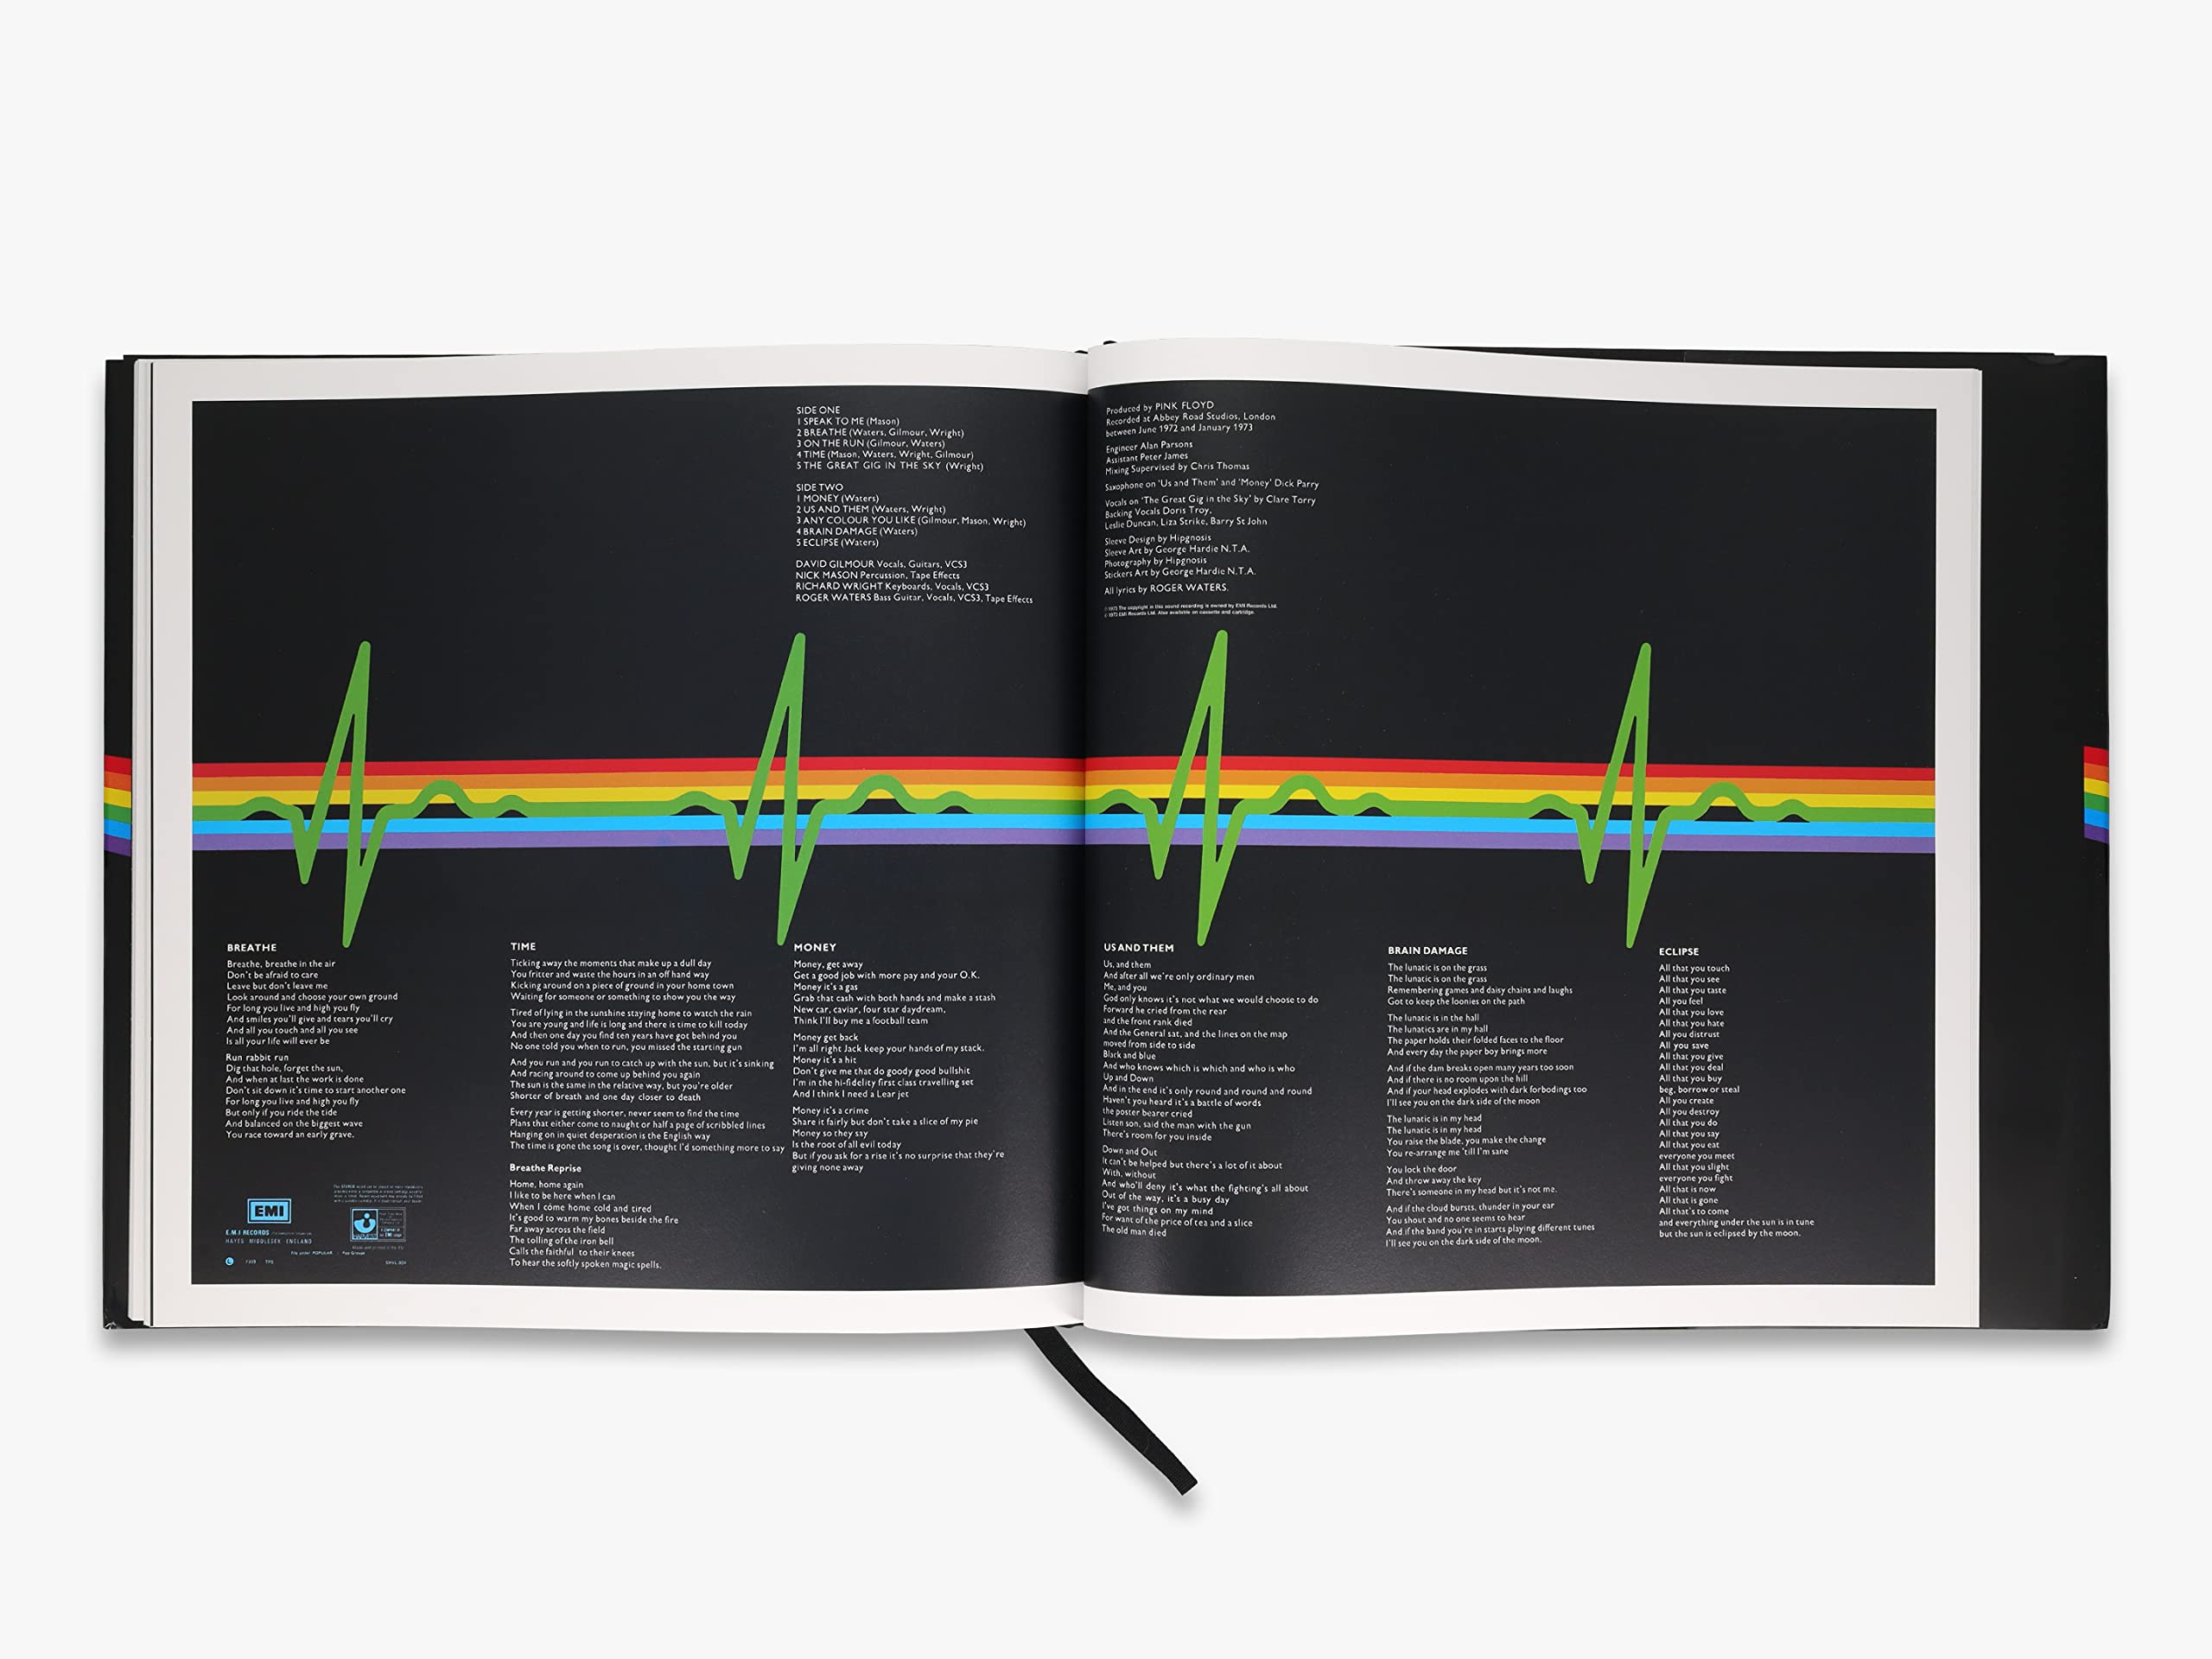 Pink Floyd: The Dark Side Of The Moon: The Official 50th Anniversary Book